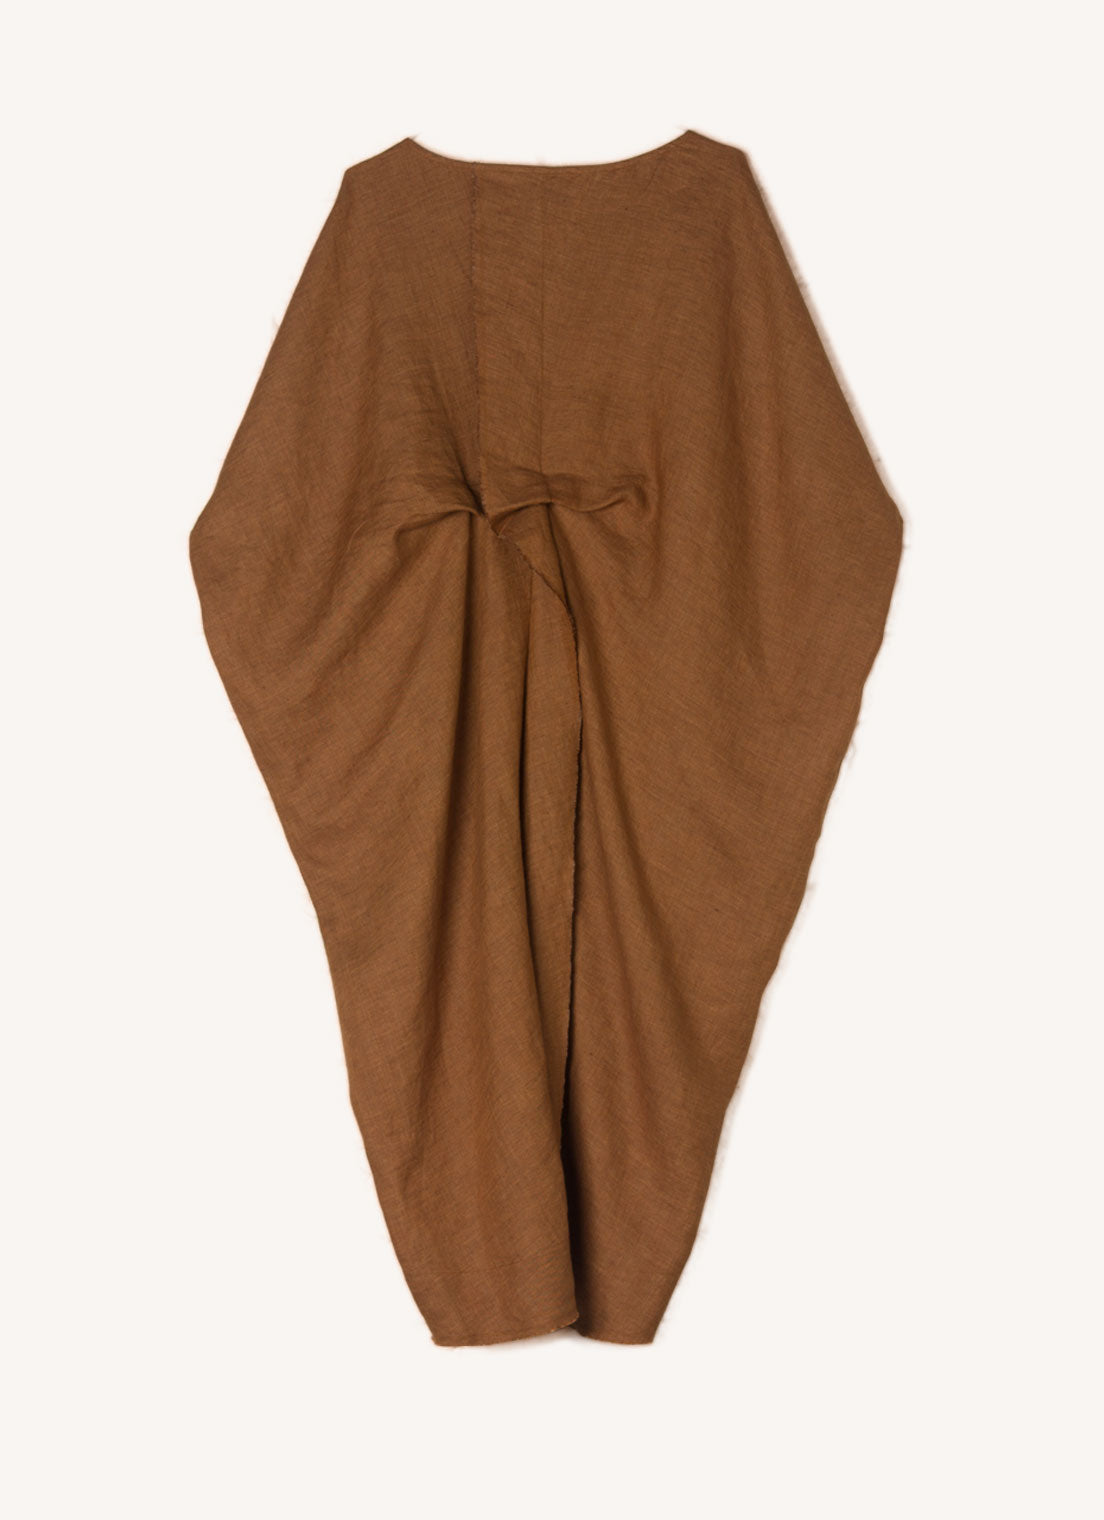 A bronze, one size, easy fit pure European linen dress with ruched back detailing